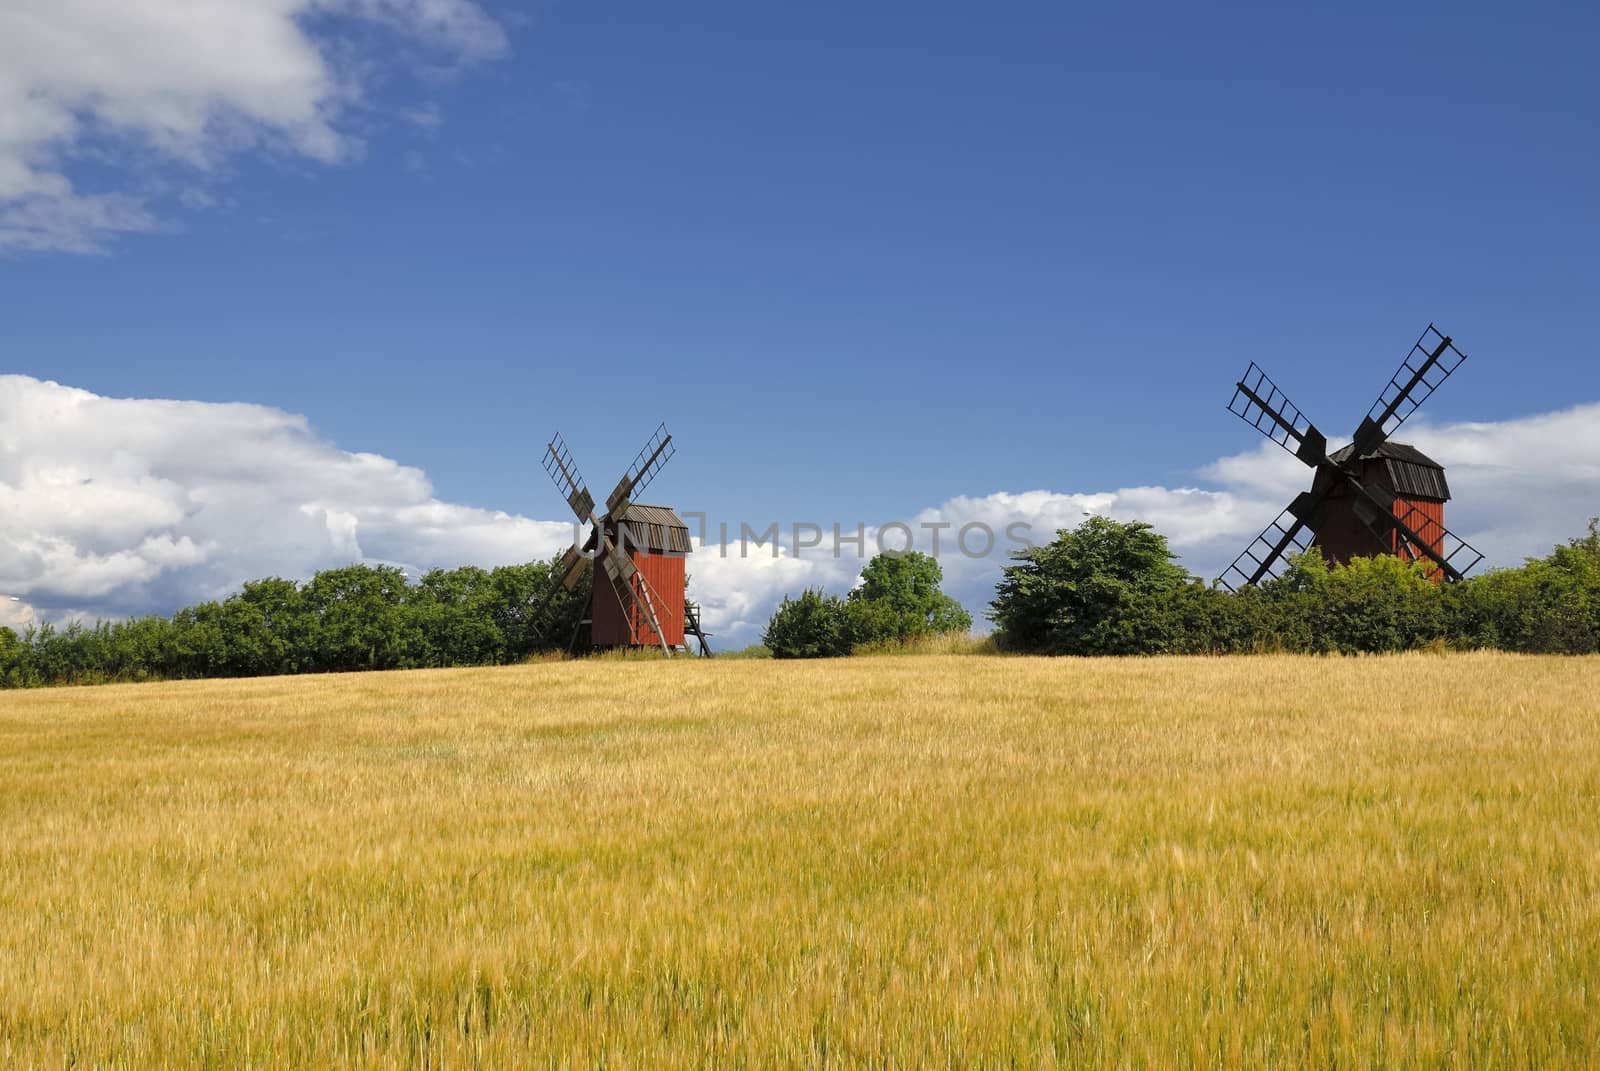 Windmill with field in a typical Swedish setting. Windmill is located in Öland, Sweden.